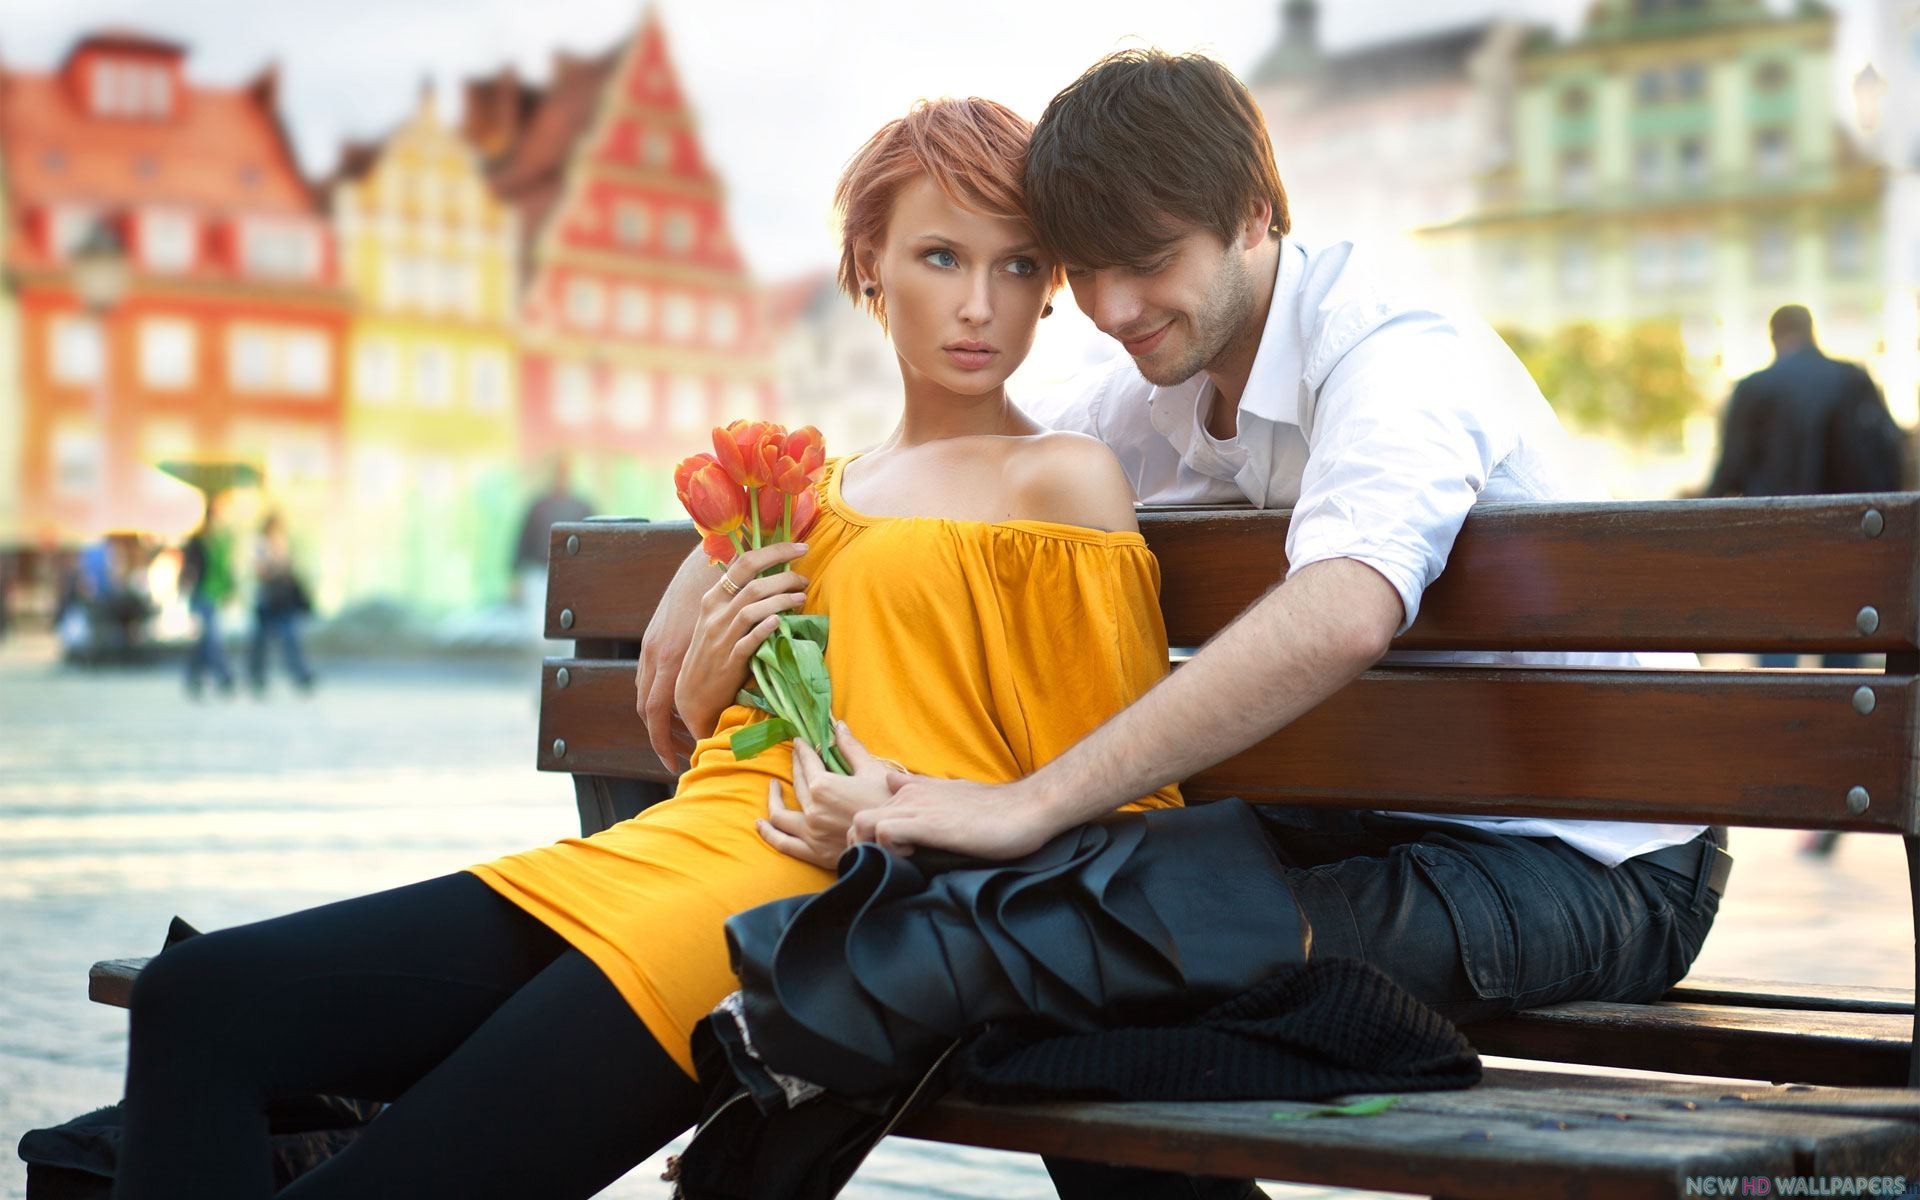 Love Couple On The Bench Wide - Girl And Boy On Date - HD Wallpaper 